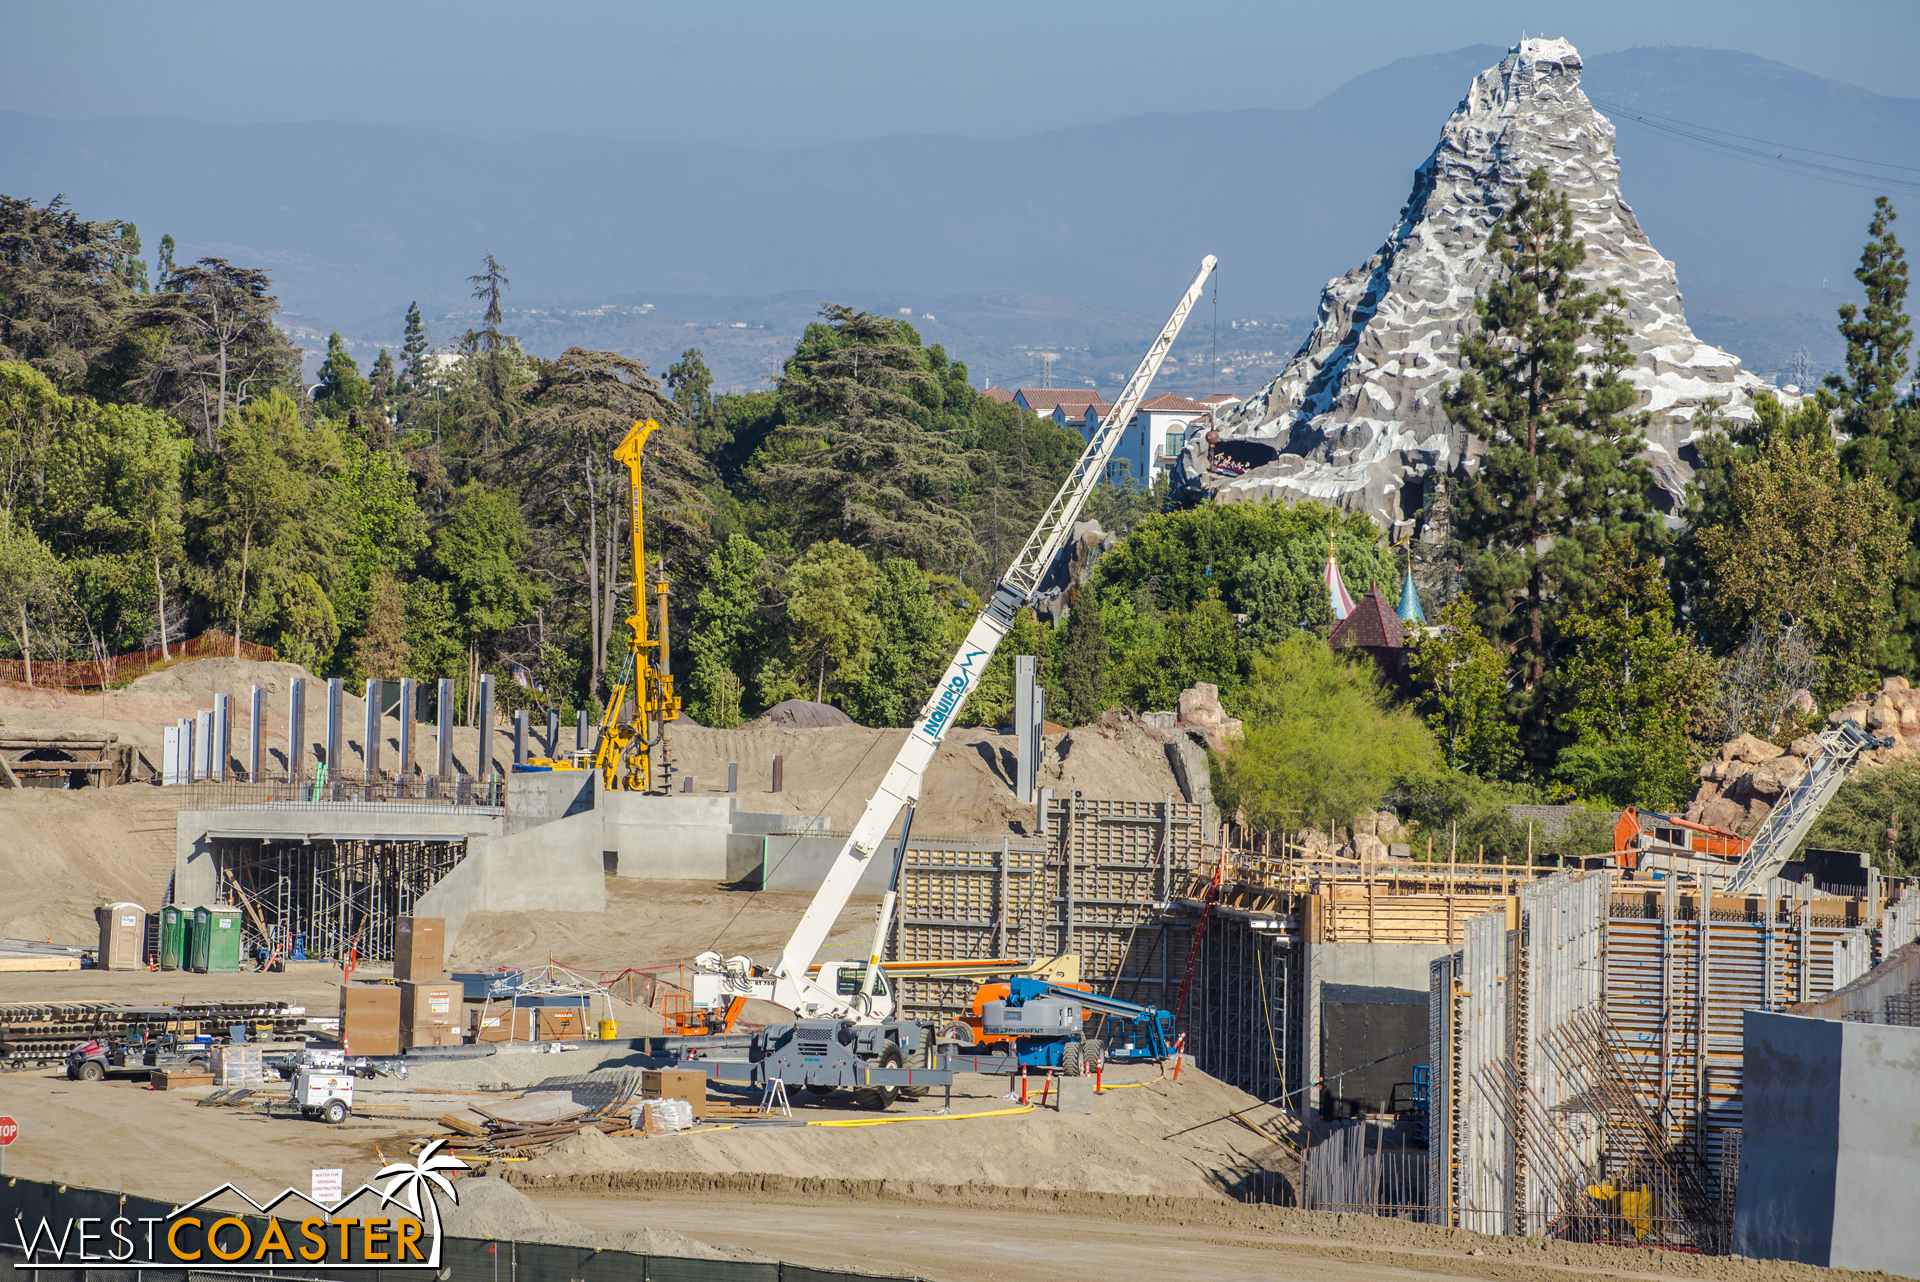  Over in the direction of the Matterhorn, we've got more concrete boxes. 